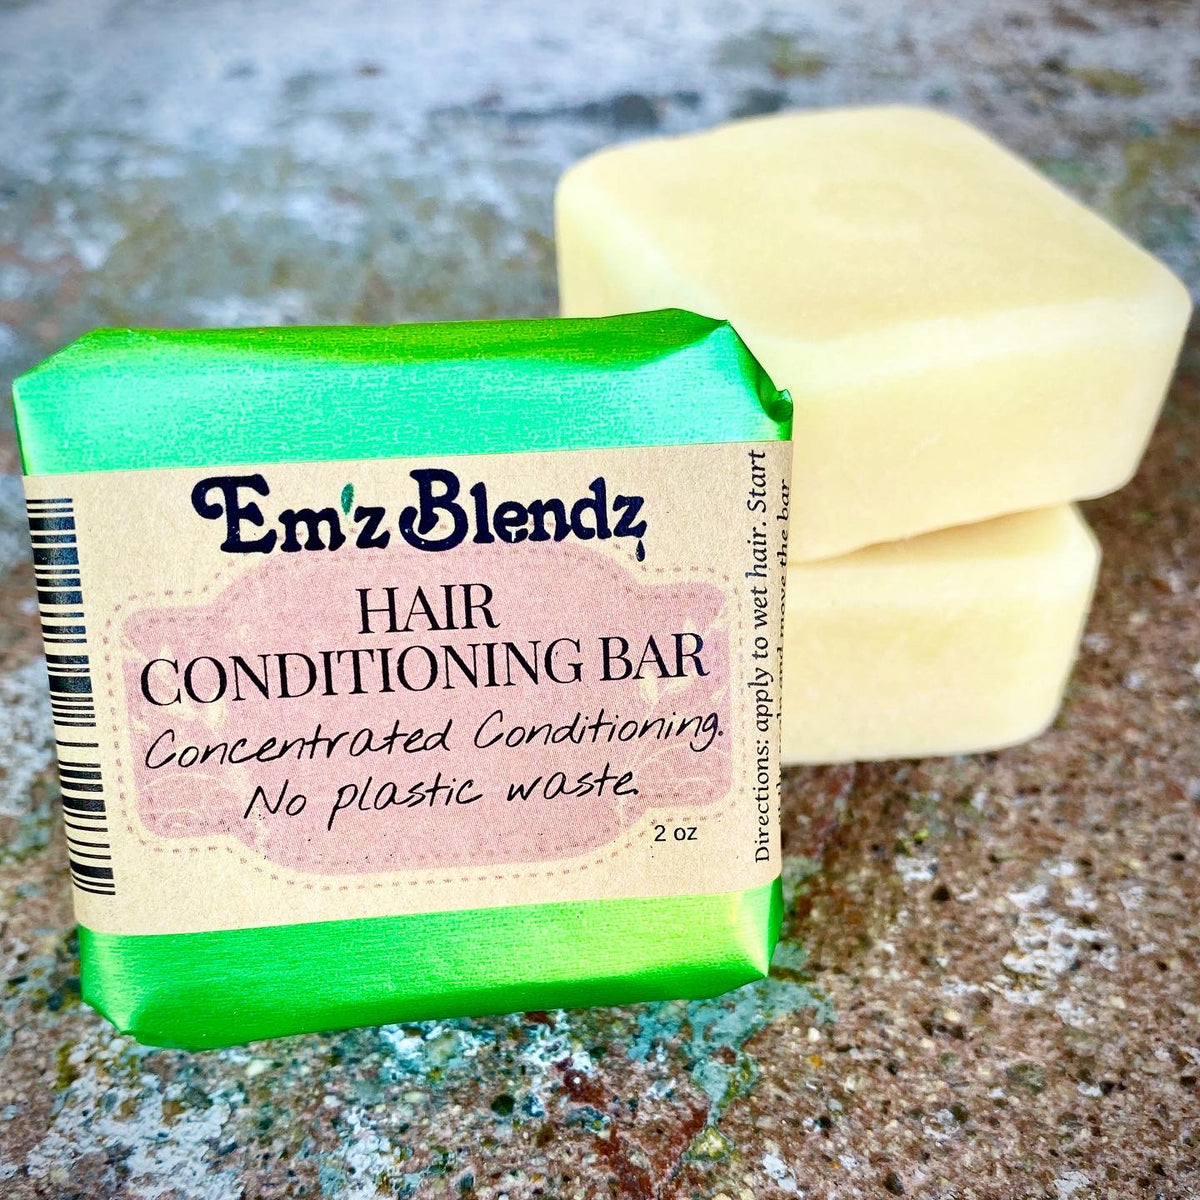 Hair Conditioning Bar | Concentated Contioning | Plastic Free - Emz Blendz